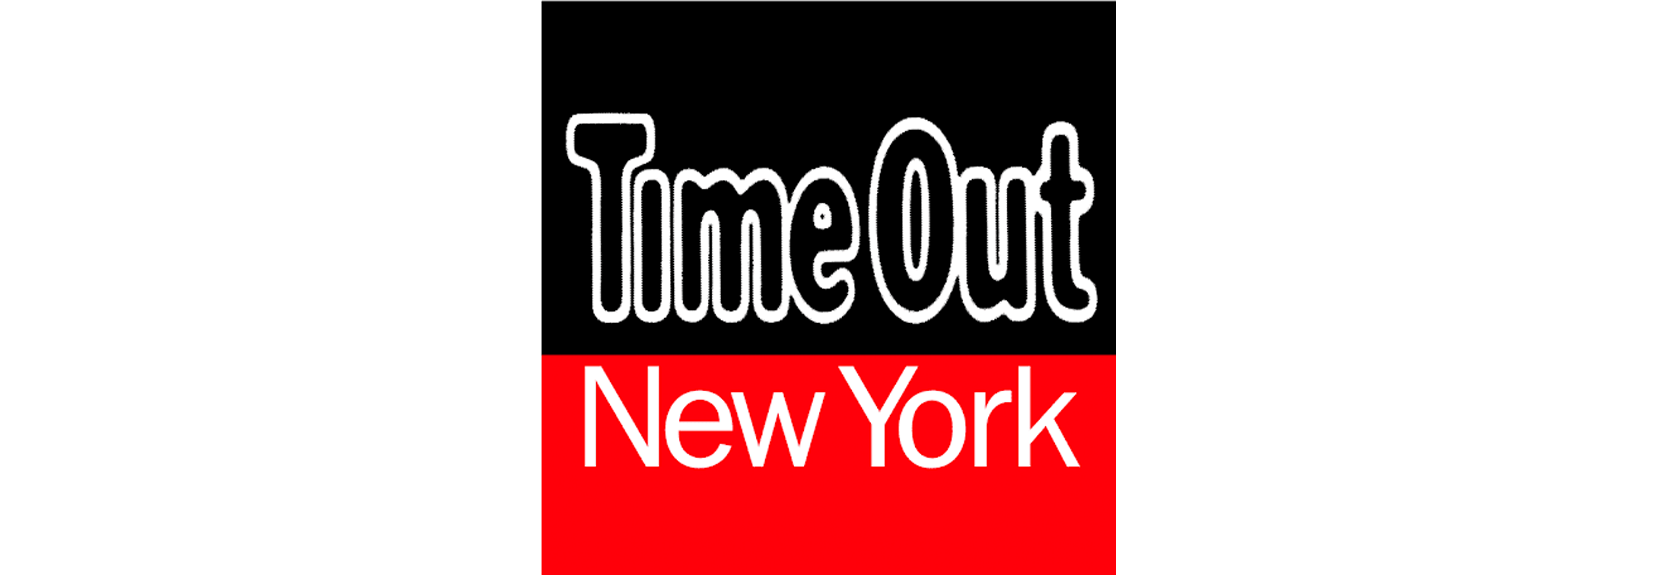 times out new york